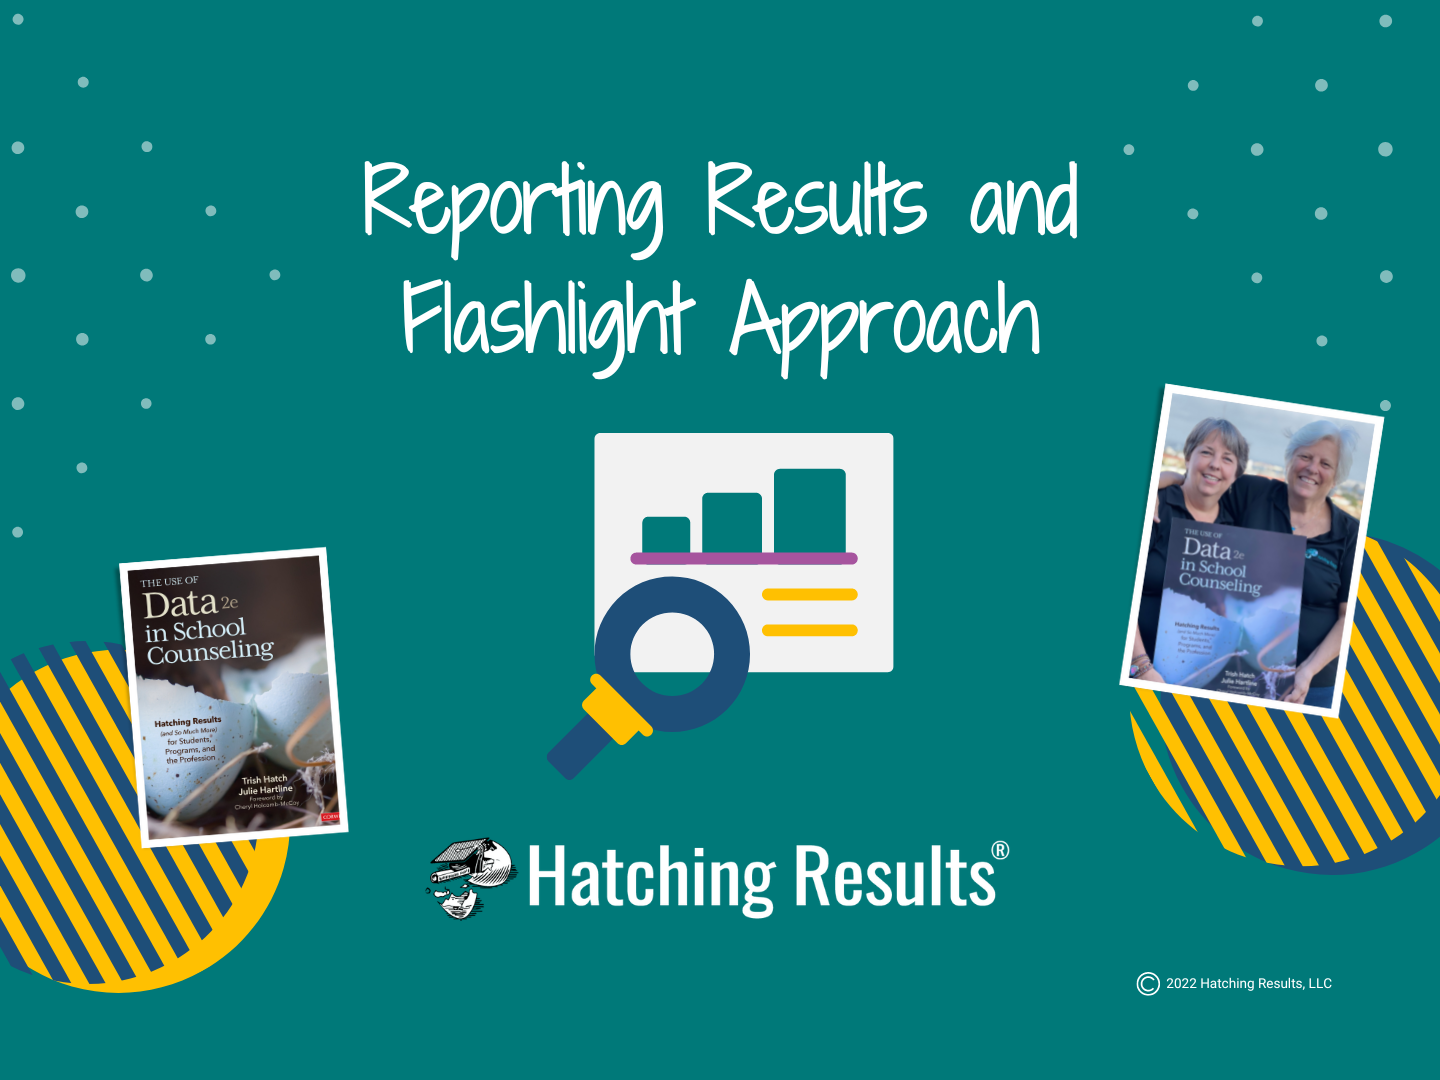 DEMO - Reporting Results and Flashlight Approach